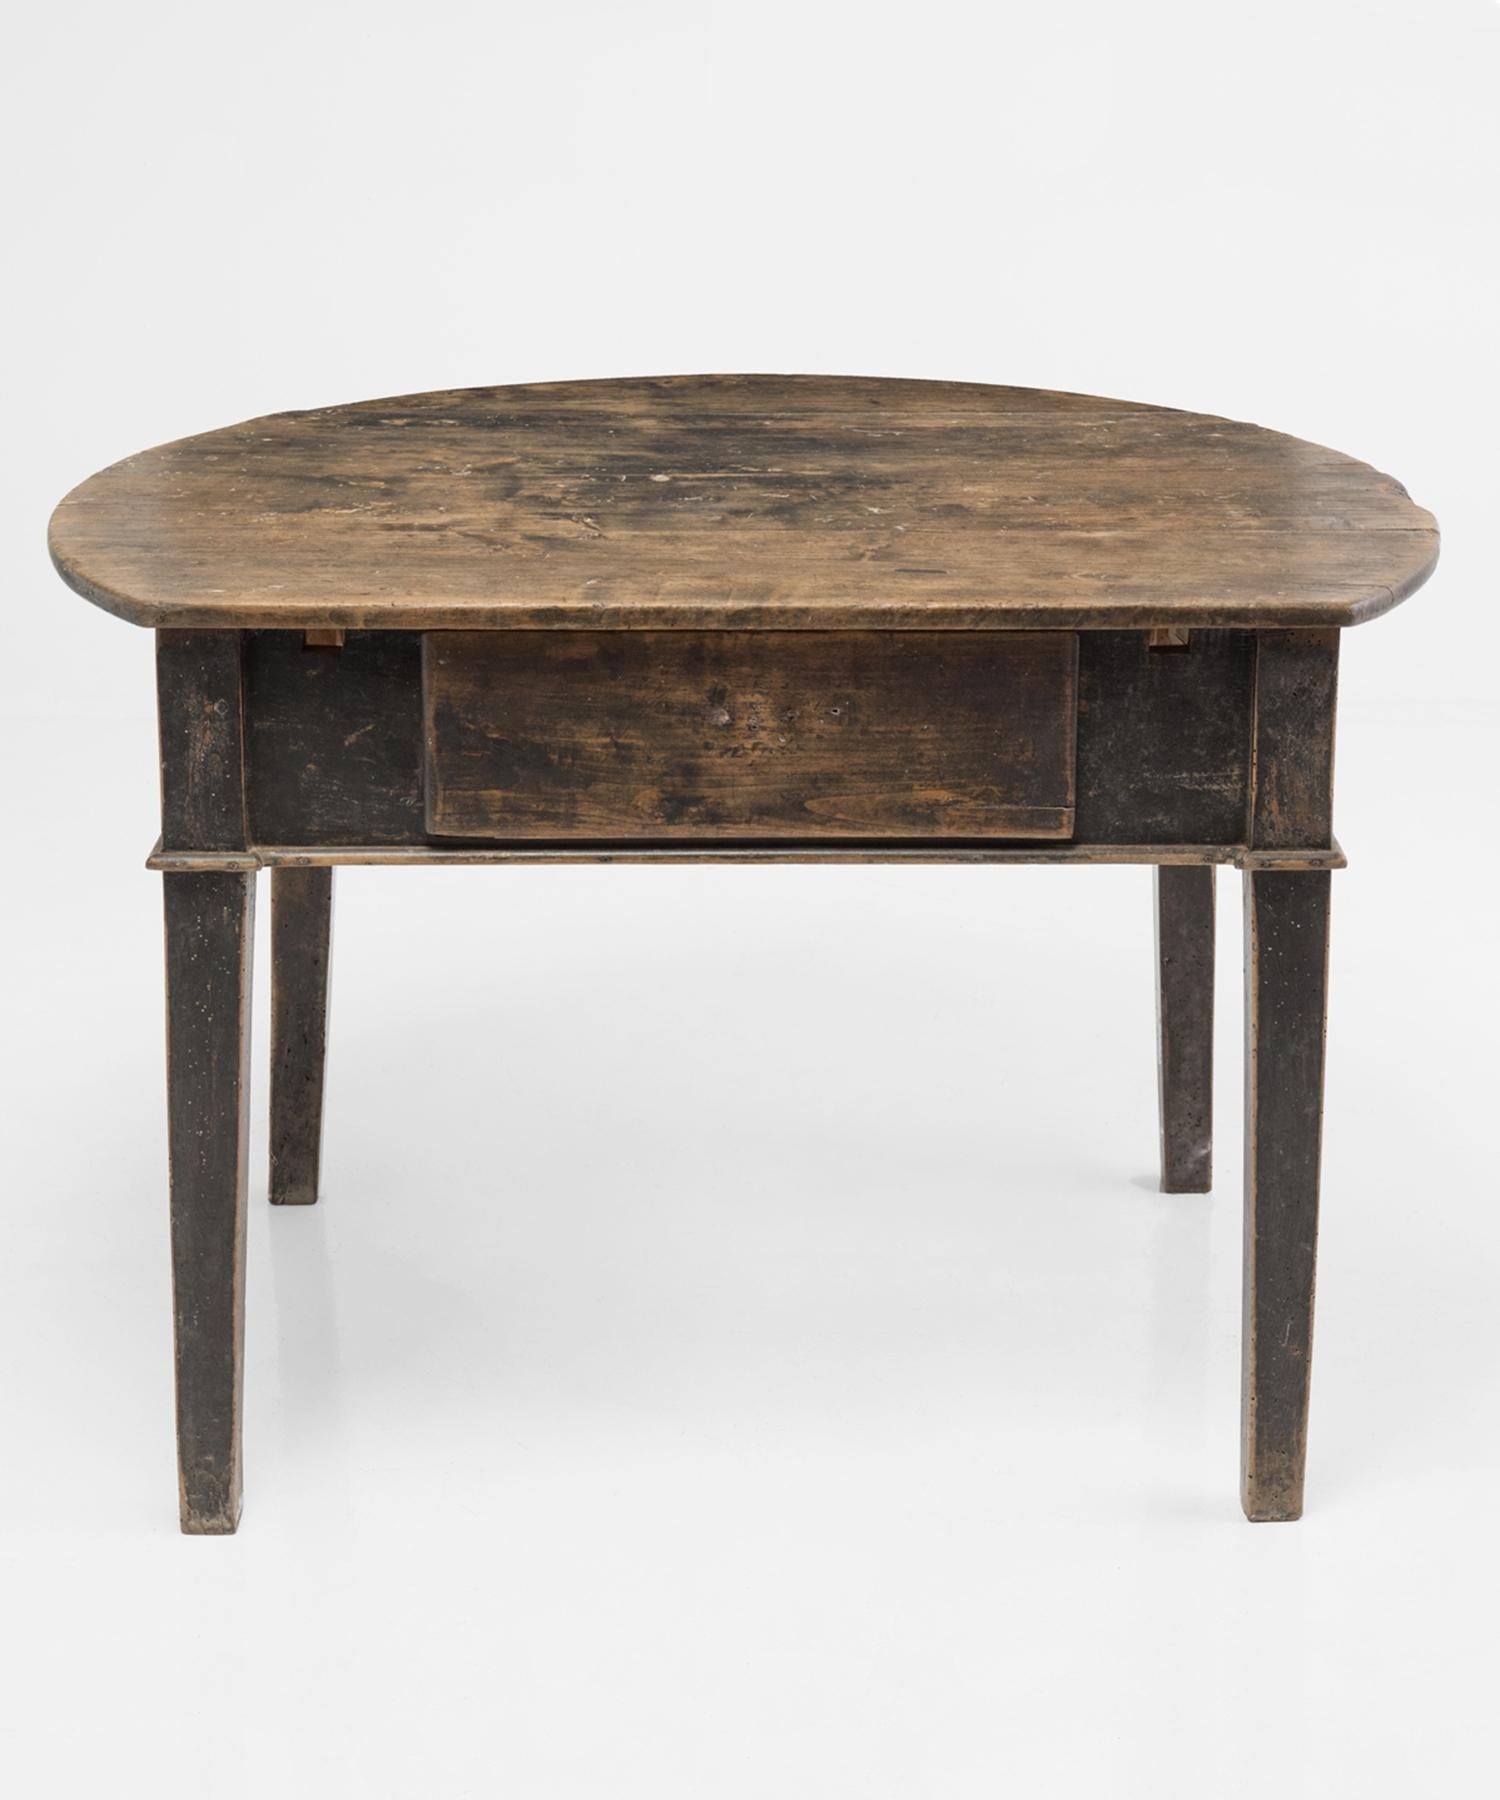 Catalan prep table made in 19th century Spain.

Unique table with two leaves that transforms the piece from circular to rectangular in shape. Removing one of the leaves reveals a single drawer on the base.

Walnut top with amazing patina, and